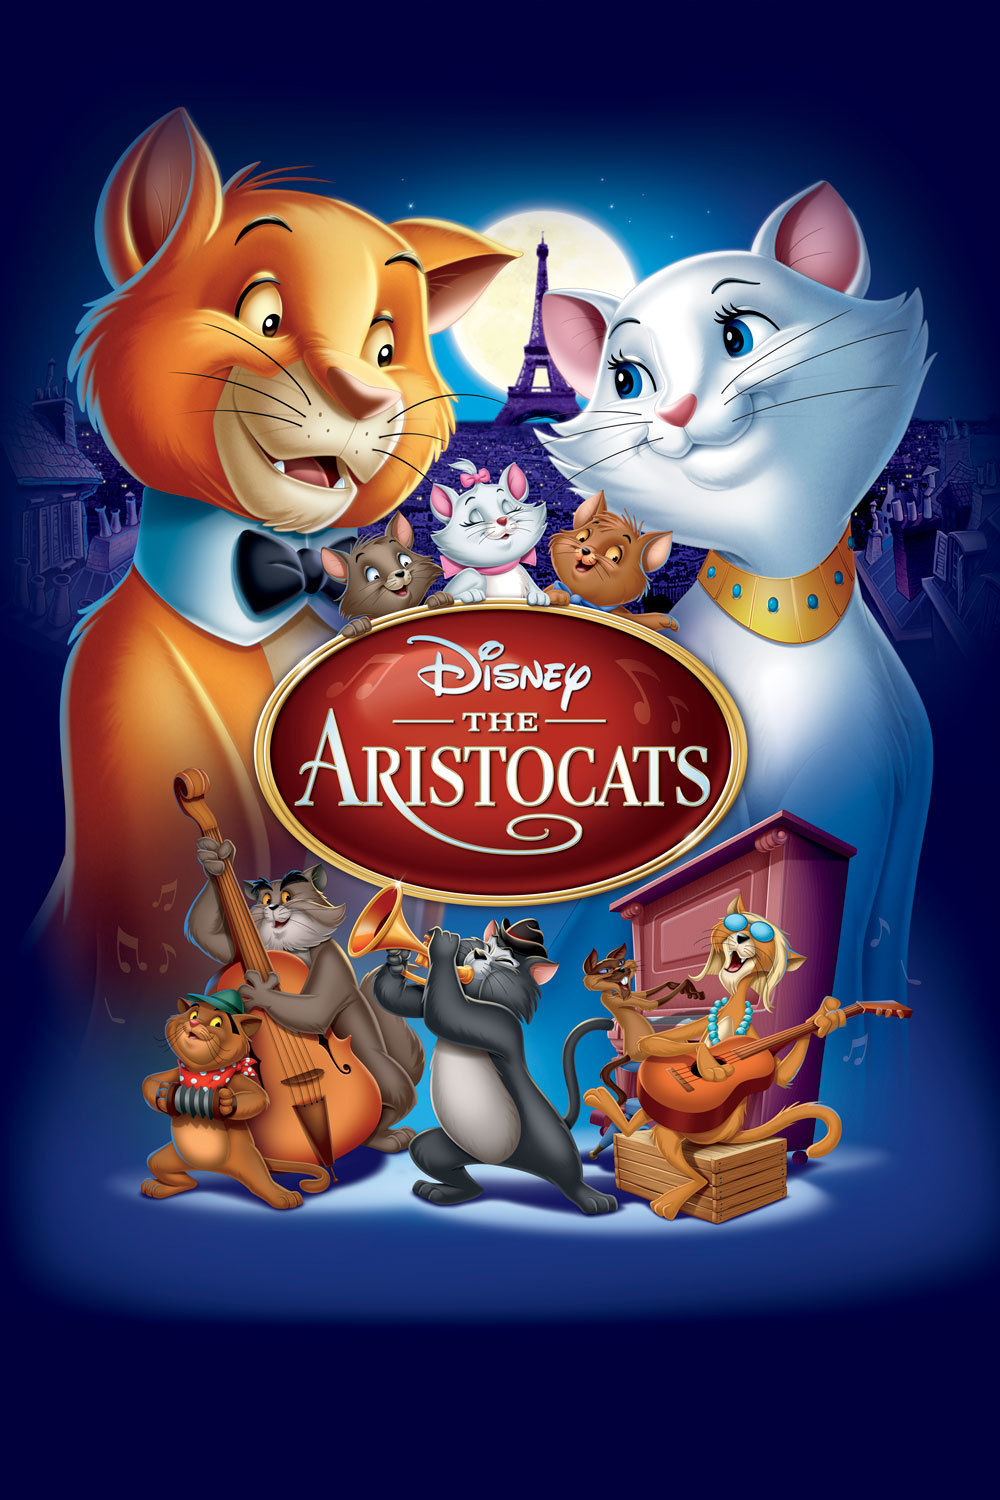 The Aristocats  Walt Disney  Free Download Borrow and Streaming   Internet Archive